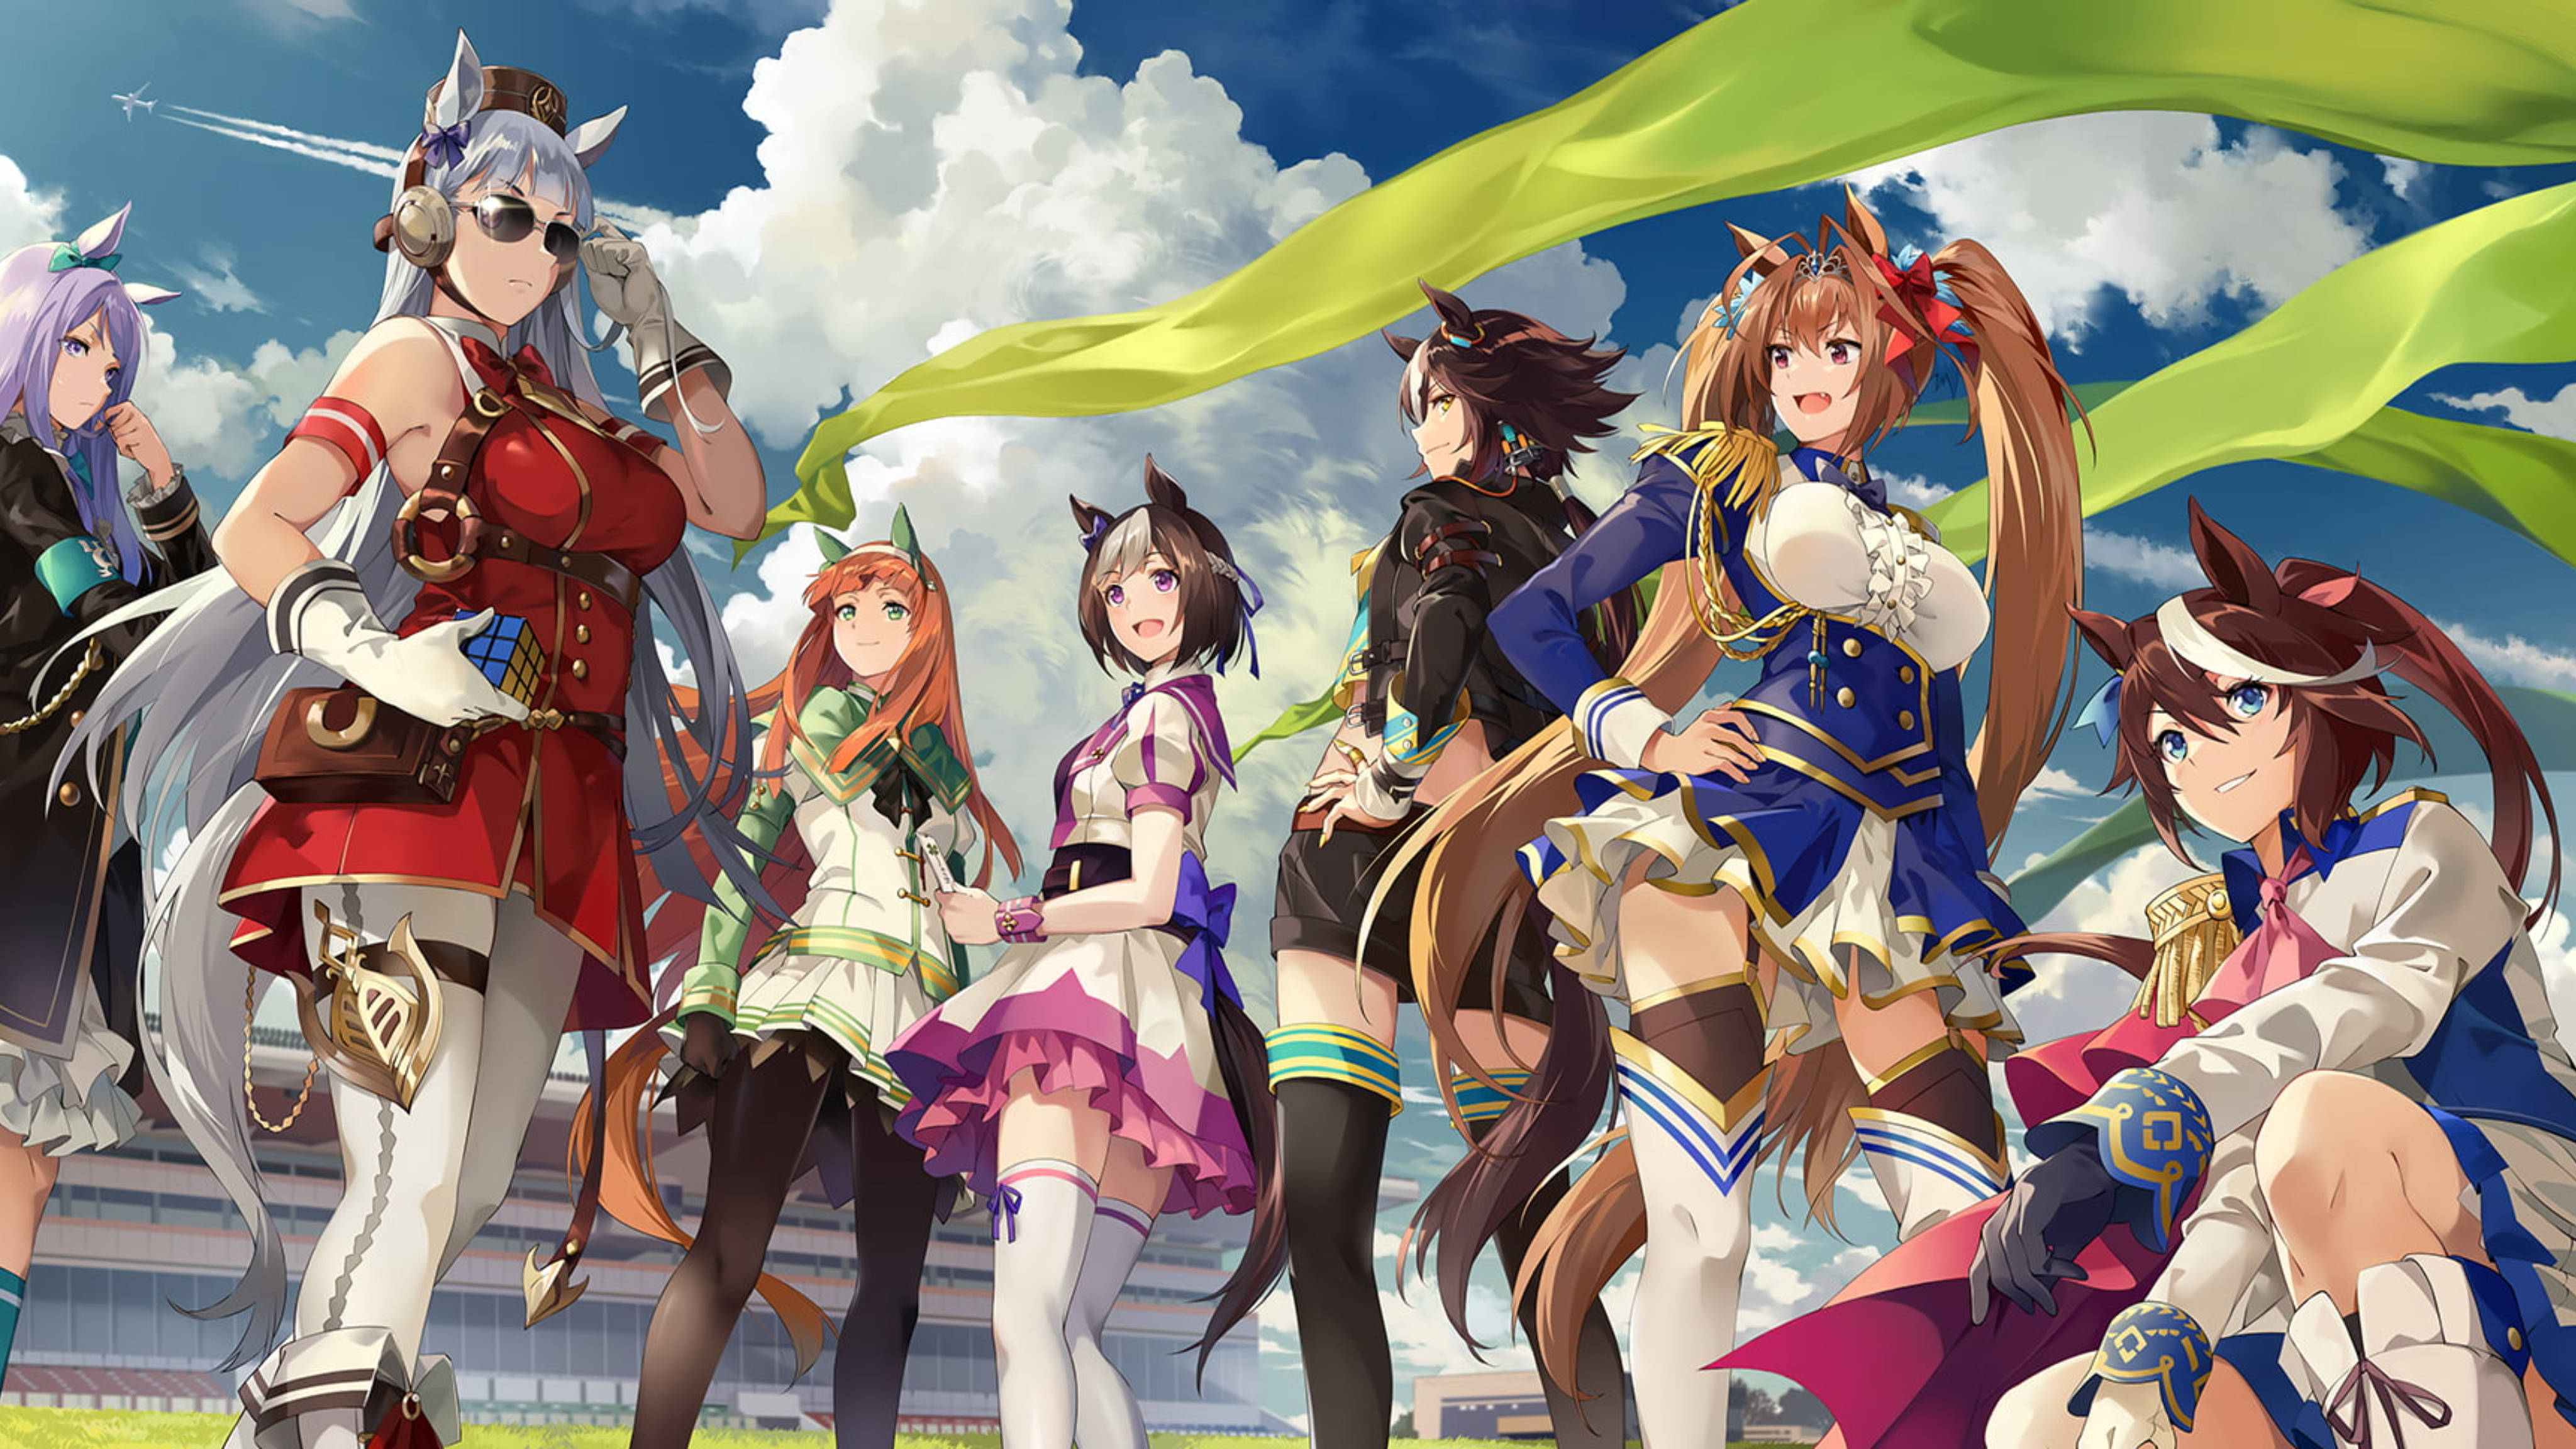 Uma Musume Pretty Derby Anime Girls Group Of Women Clouds Animal Ears Horse Girls 4096x2304